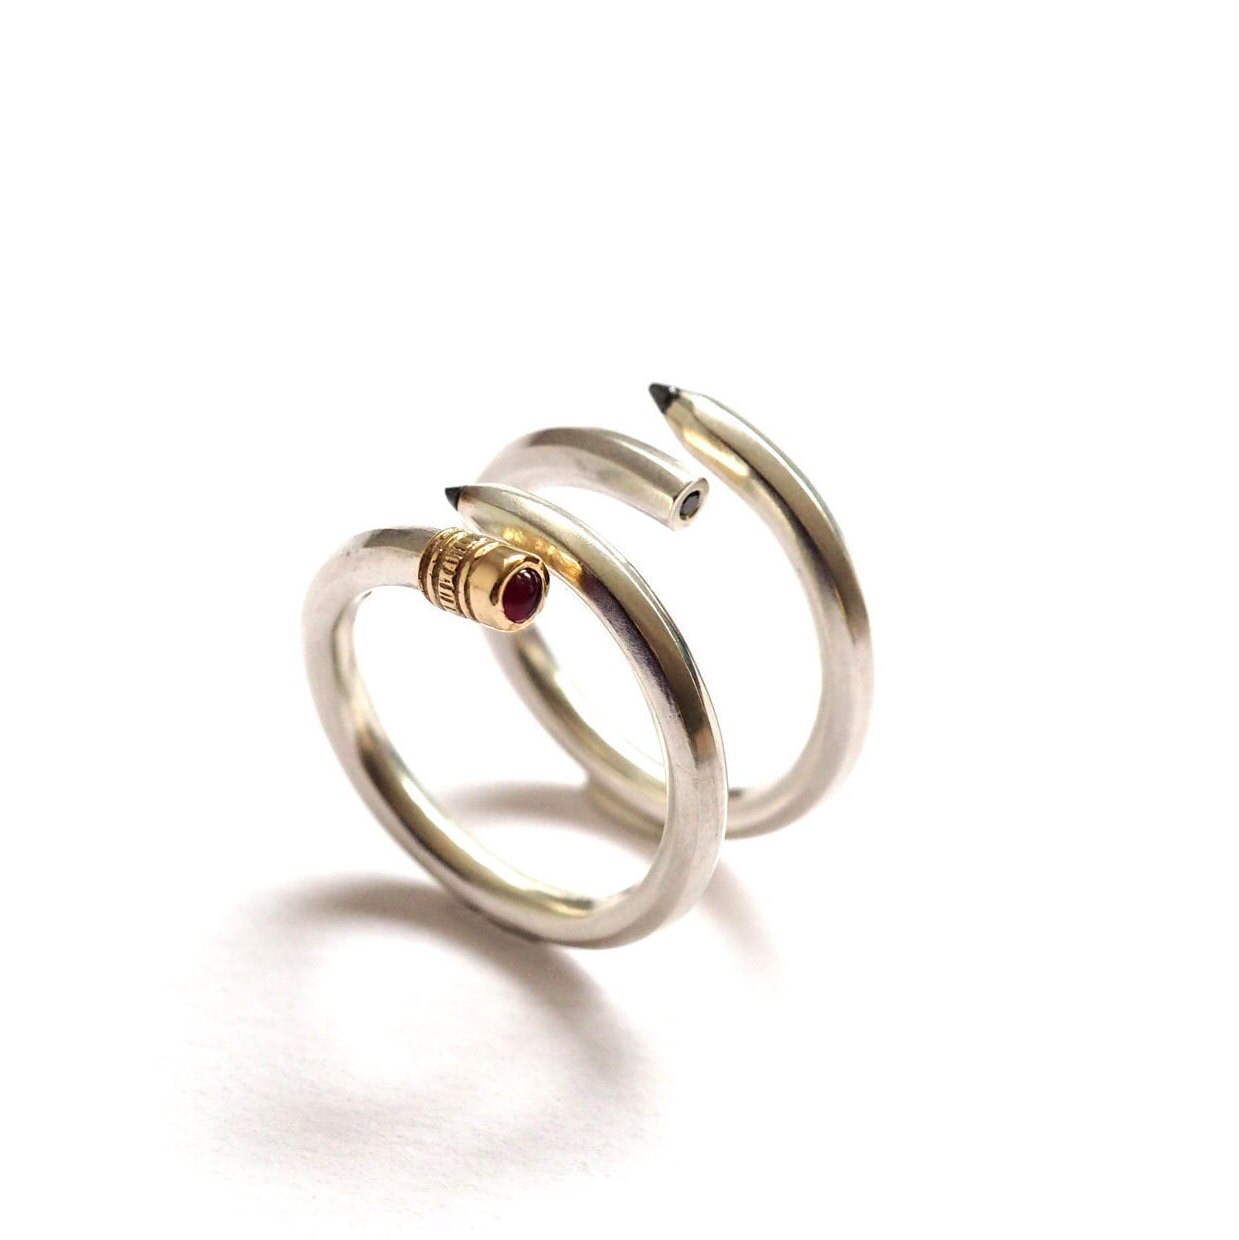 Pencil Ring - Silver, Gold and Ruby